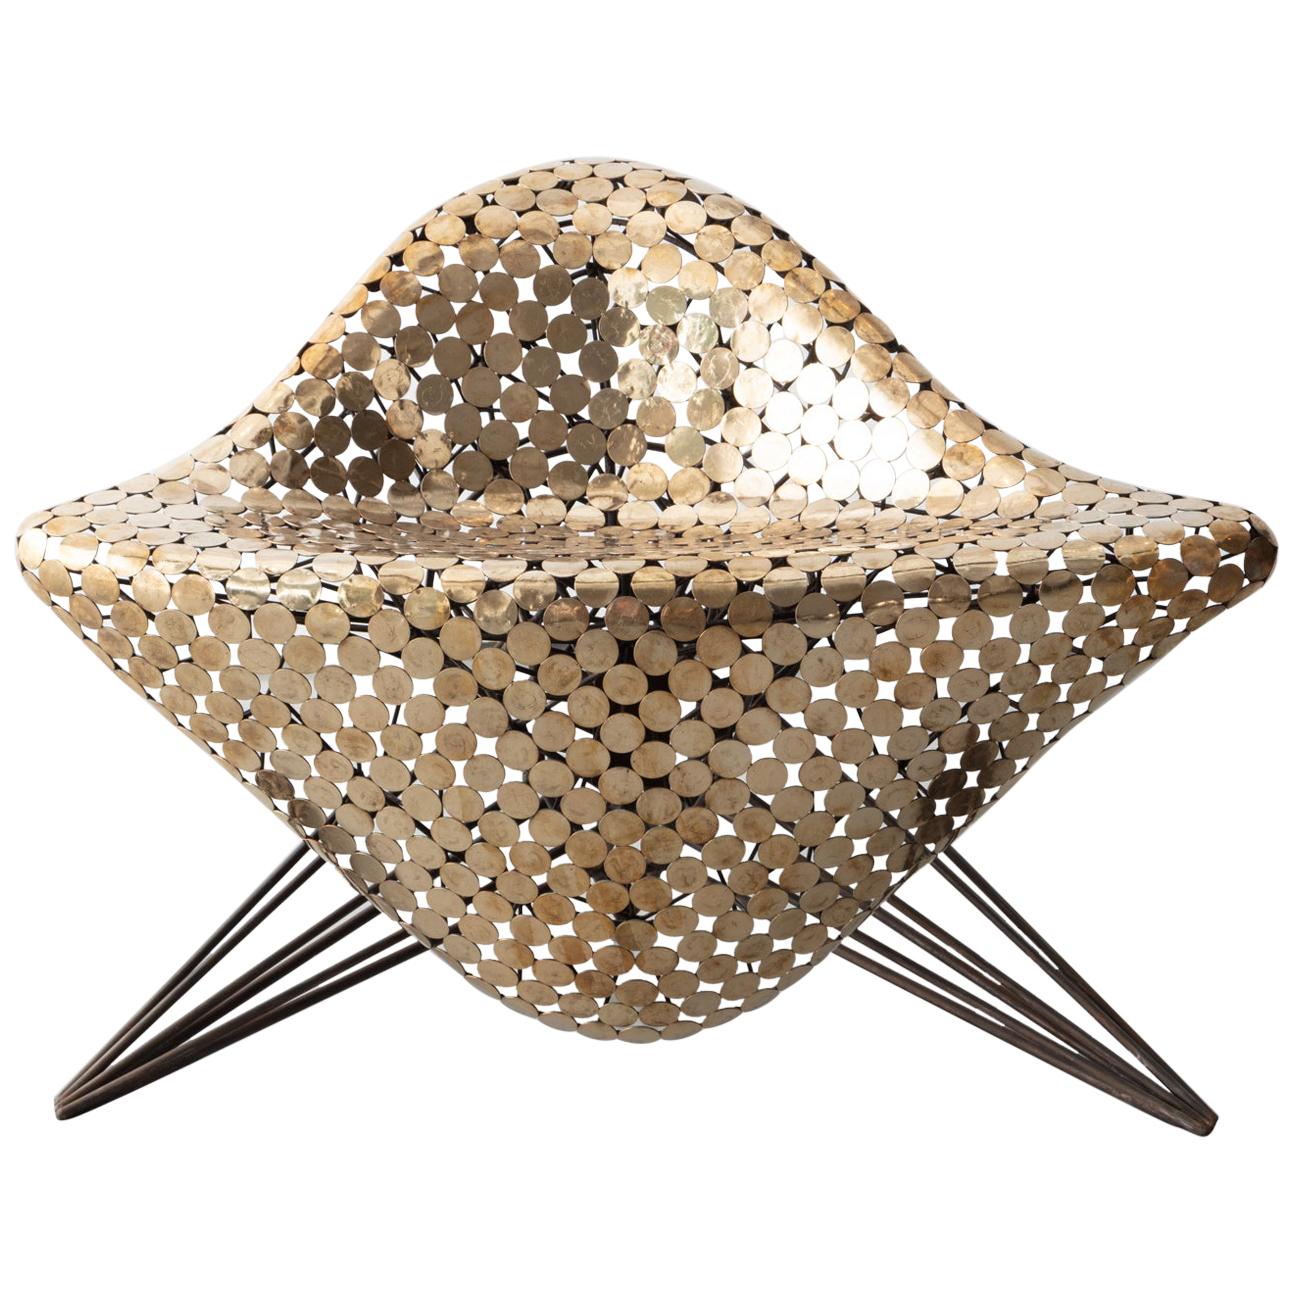 "Zittel 'Cuttlefish', " a Unique Seat in the "Septem Maria" by Johnny Swing